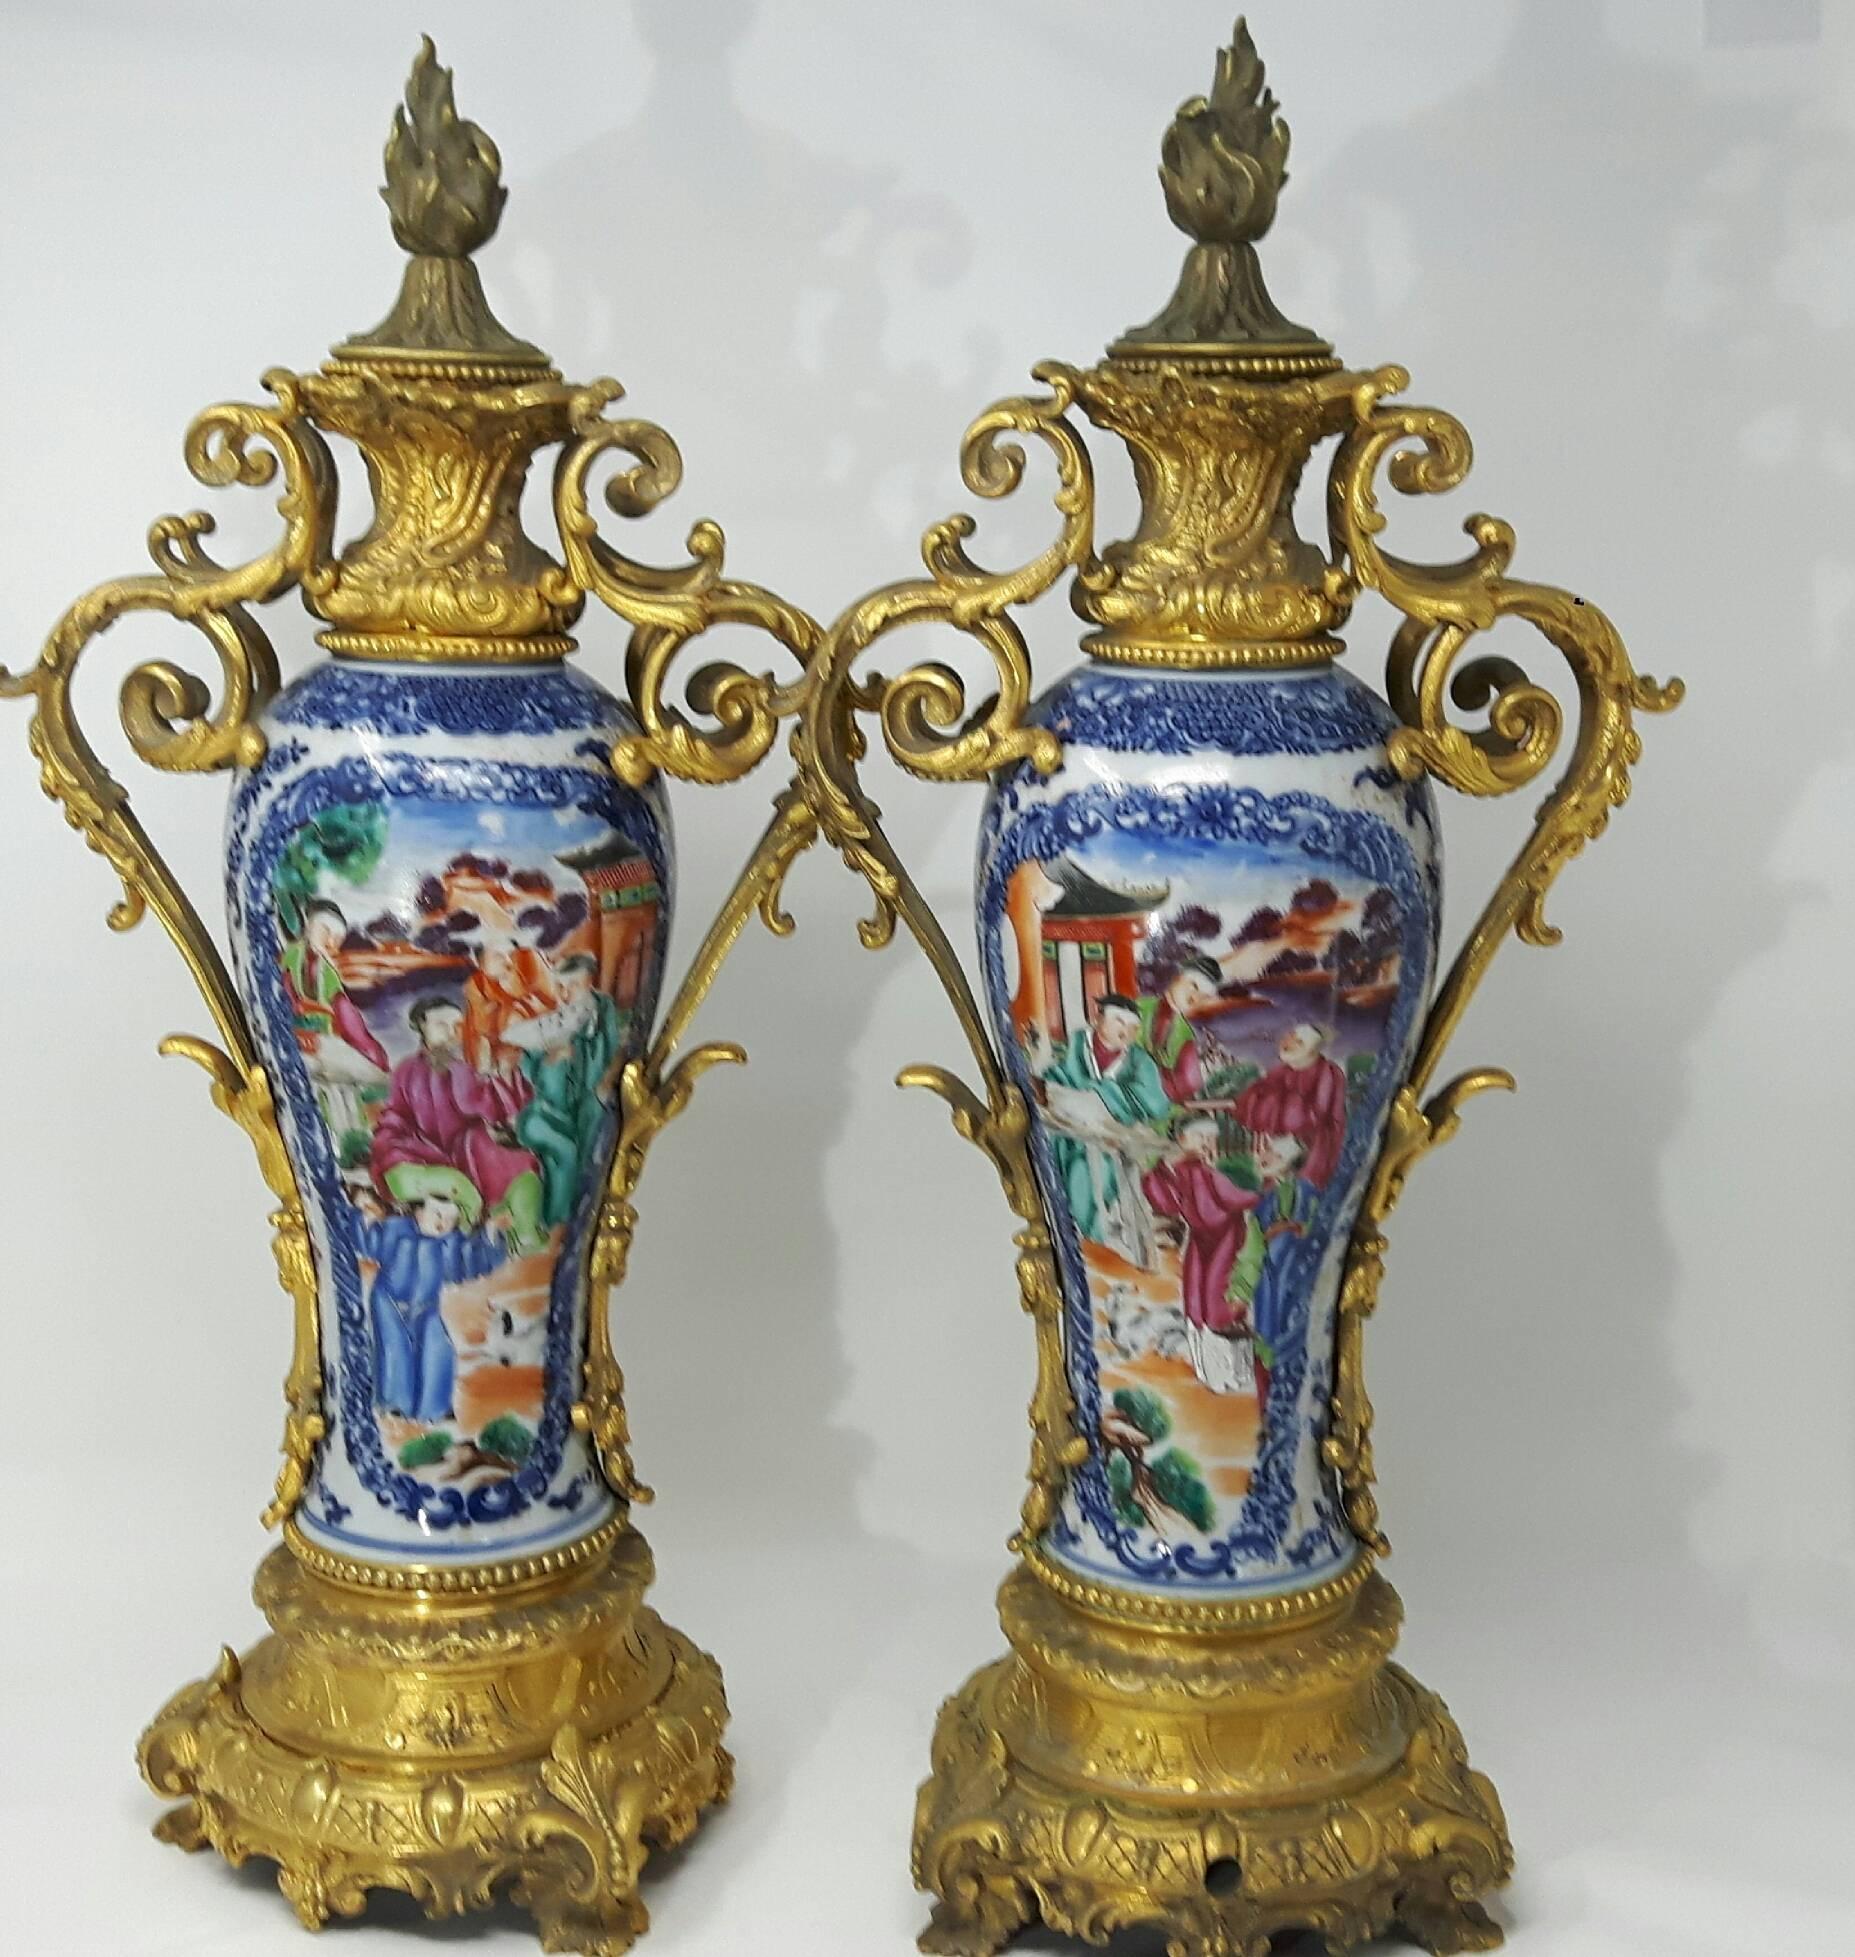 18th century ormolu-mounted Chinese export mandarin vases.
Each vase painted with figures in mandarin pallet.